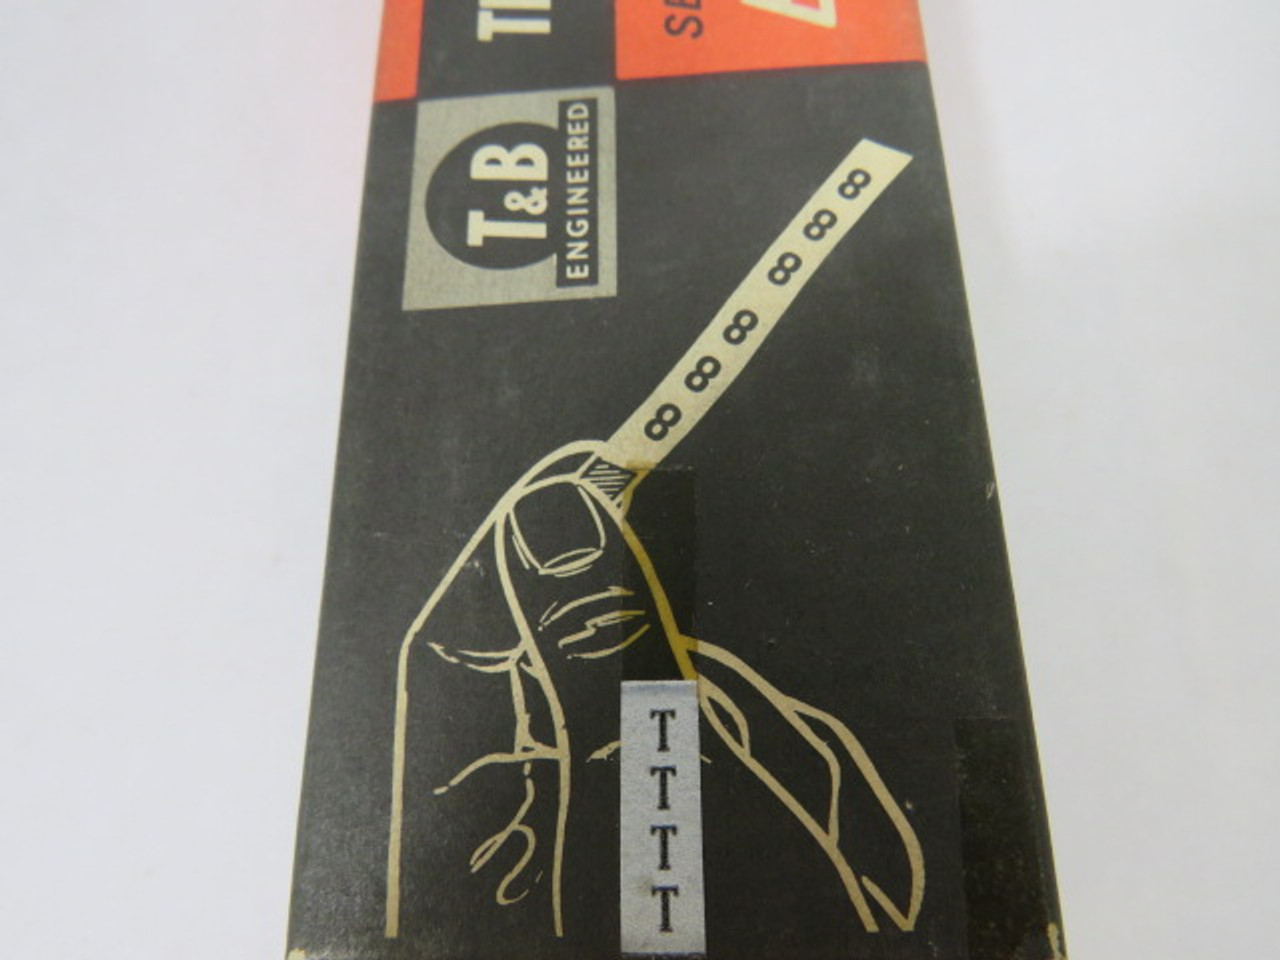 Thomas & Betts T Green E-Z-Code Wire Markers 25-Pack ! NEW !